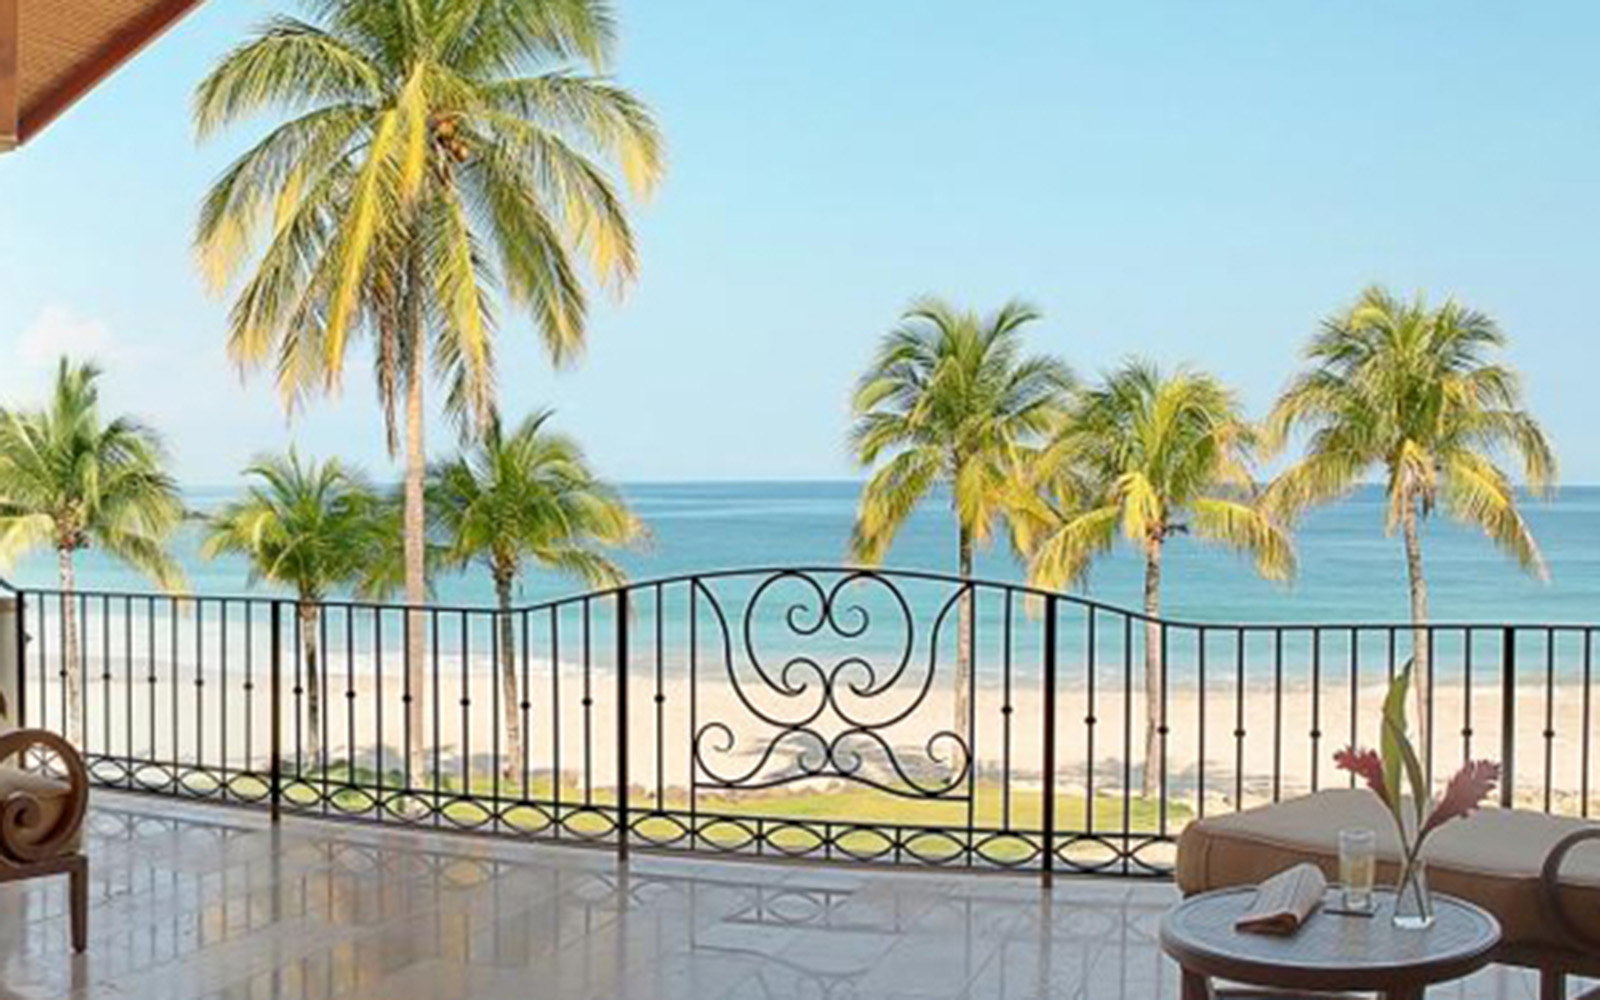 The Palms Luxury Ocean Front Gated Property Right On Flamingo Beach, Costa Rica